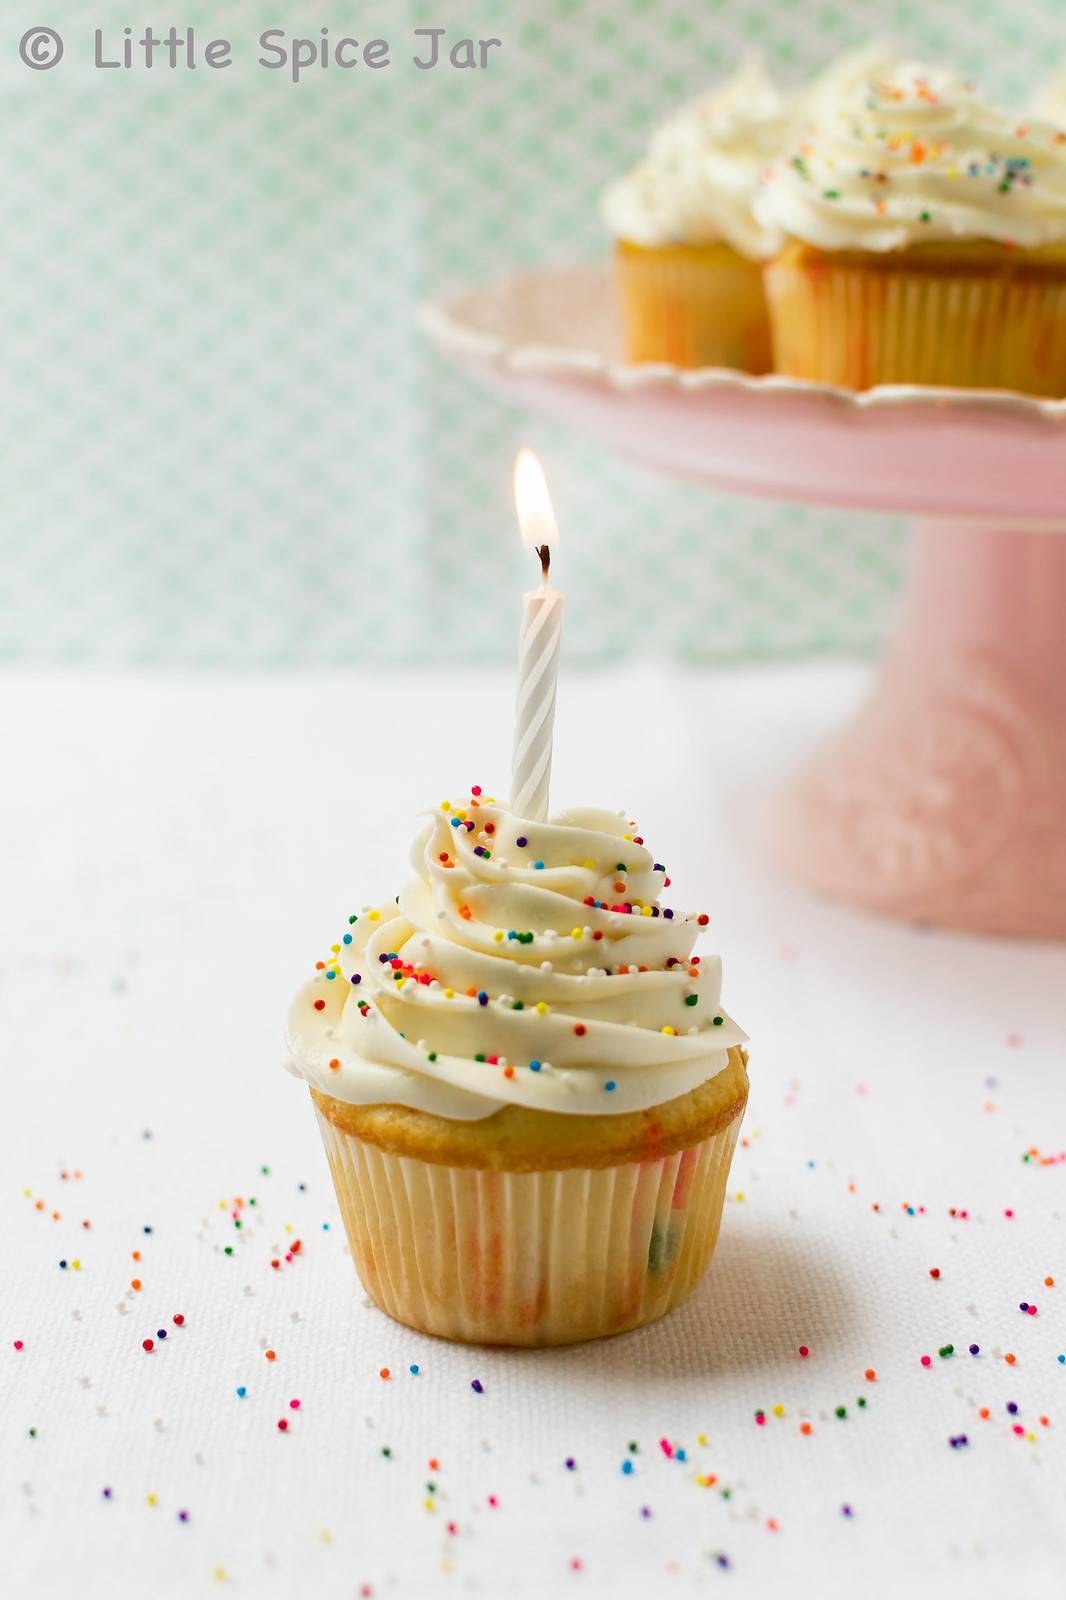 cupcake with frosting and sprinkled with lit candle